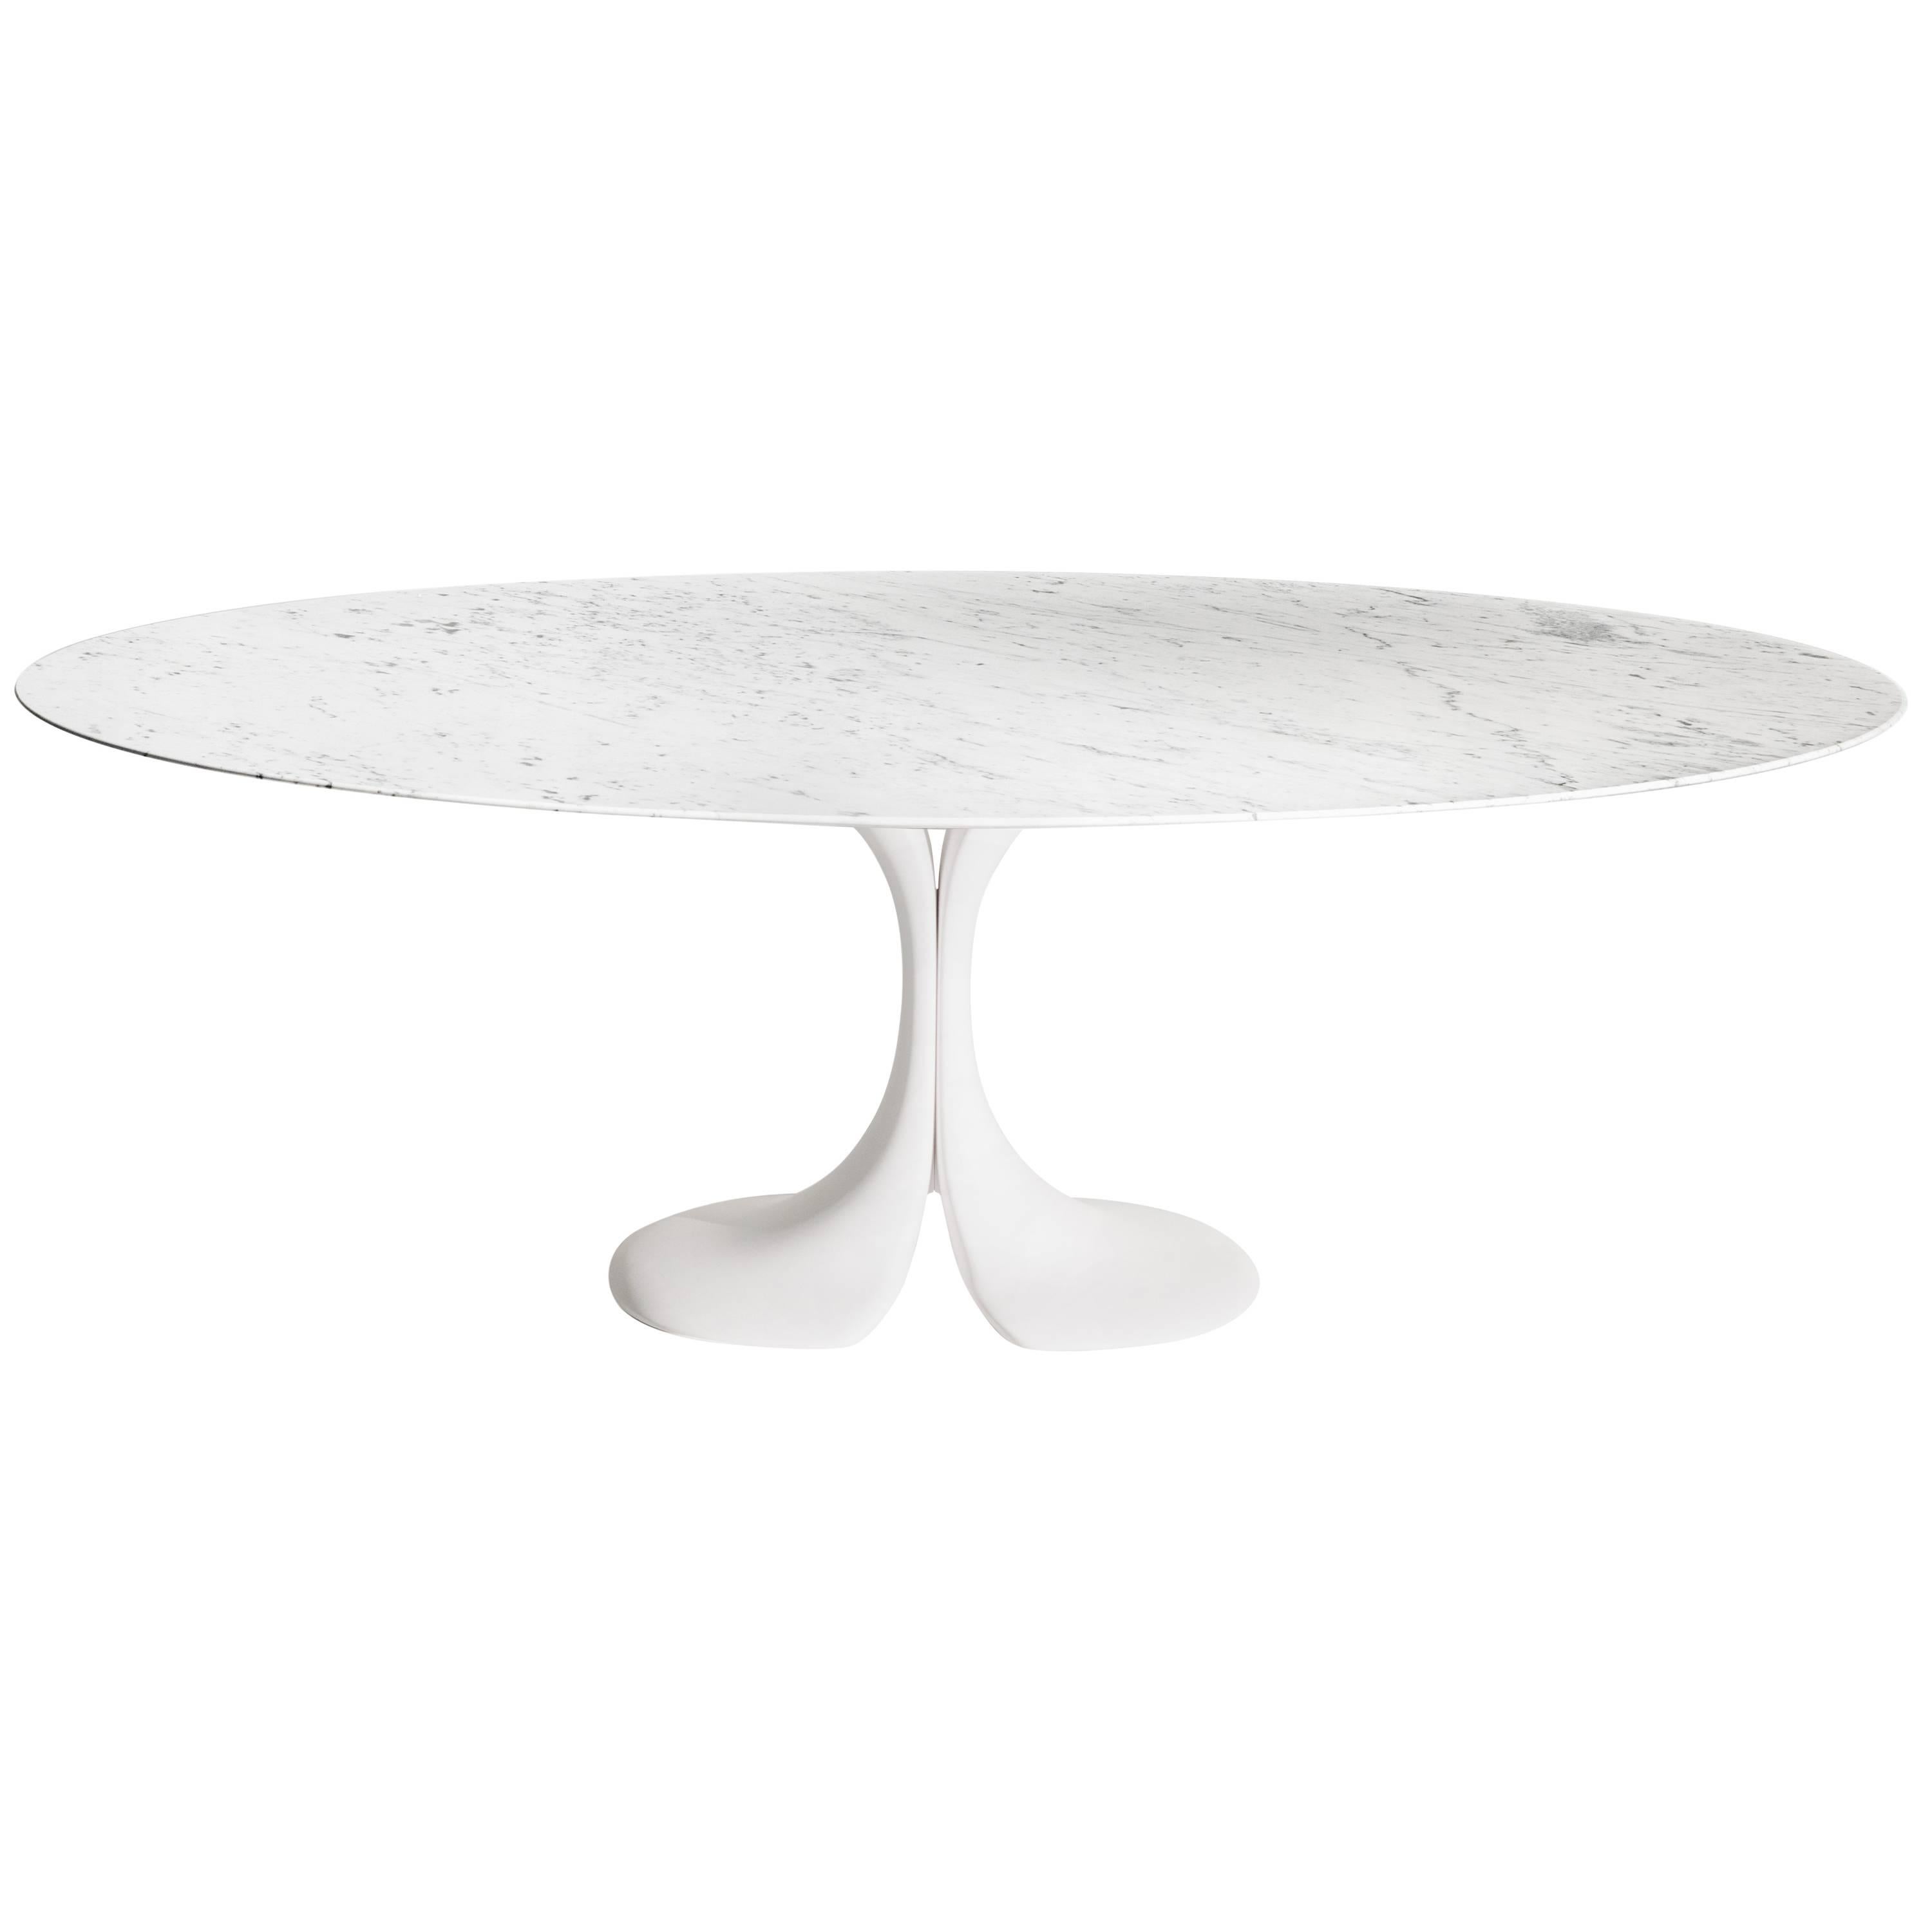 Didymos Oval Table with White Marble Top by Antonia Astori for Driade